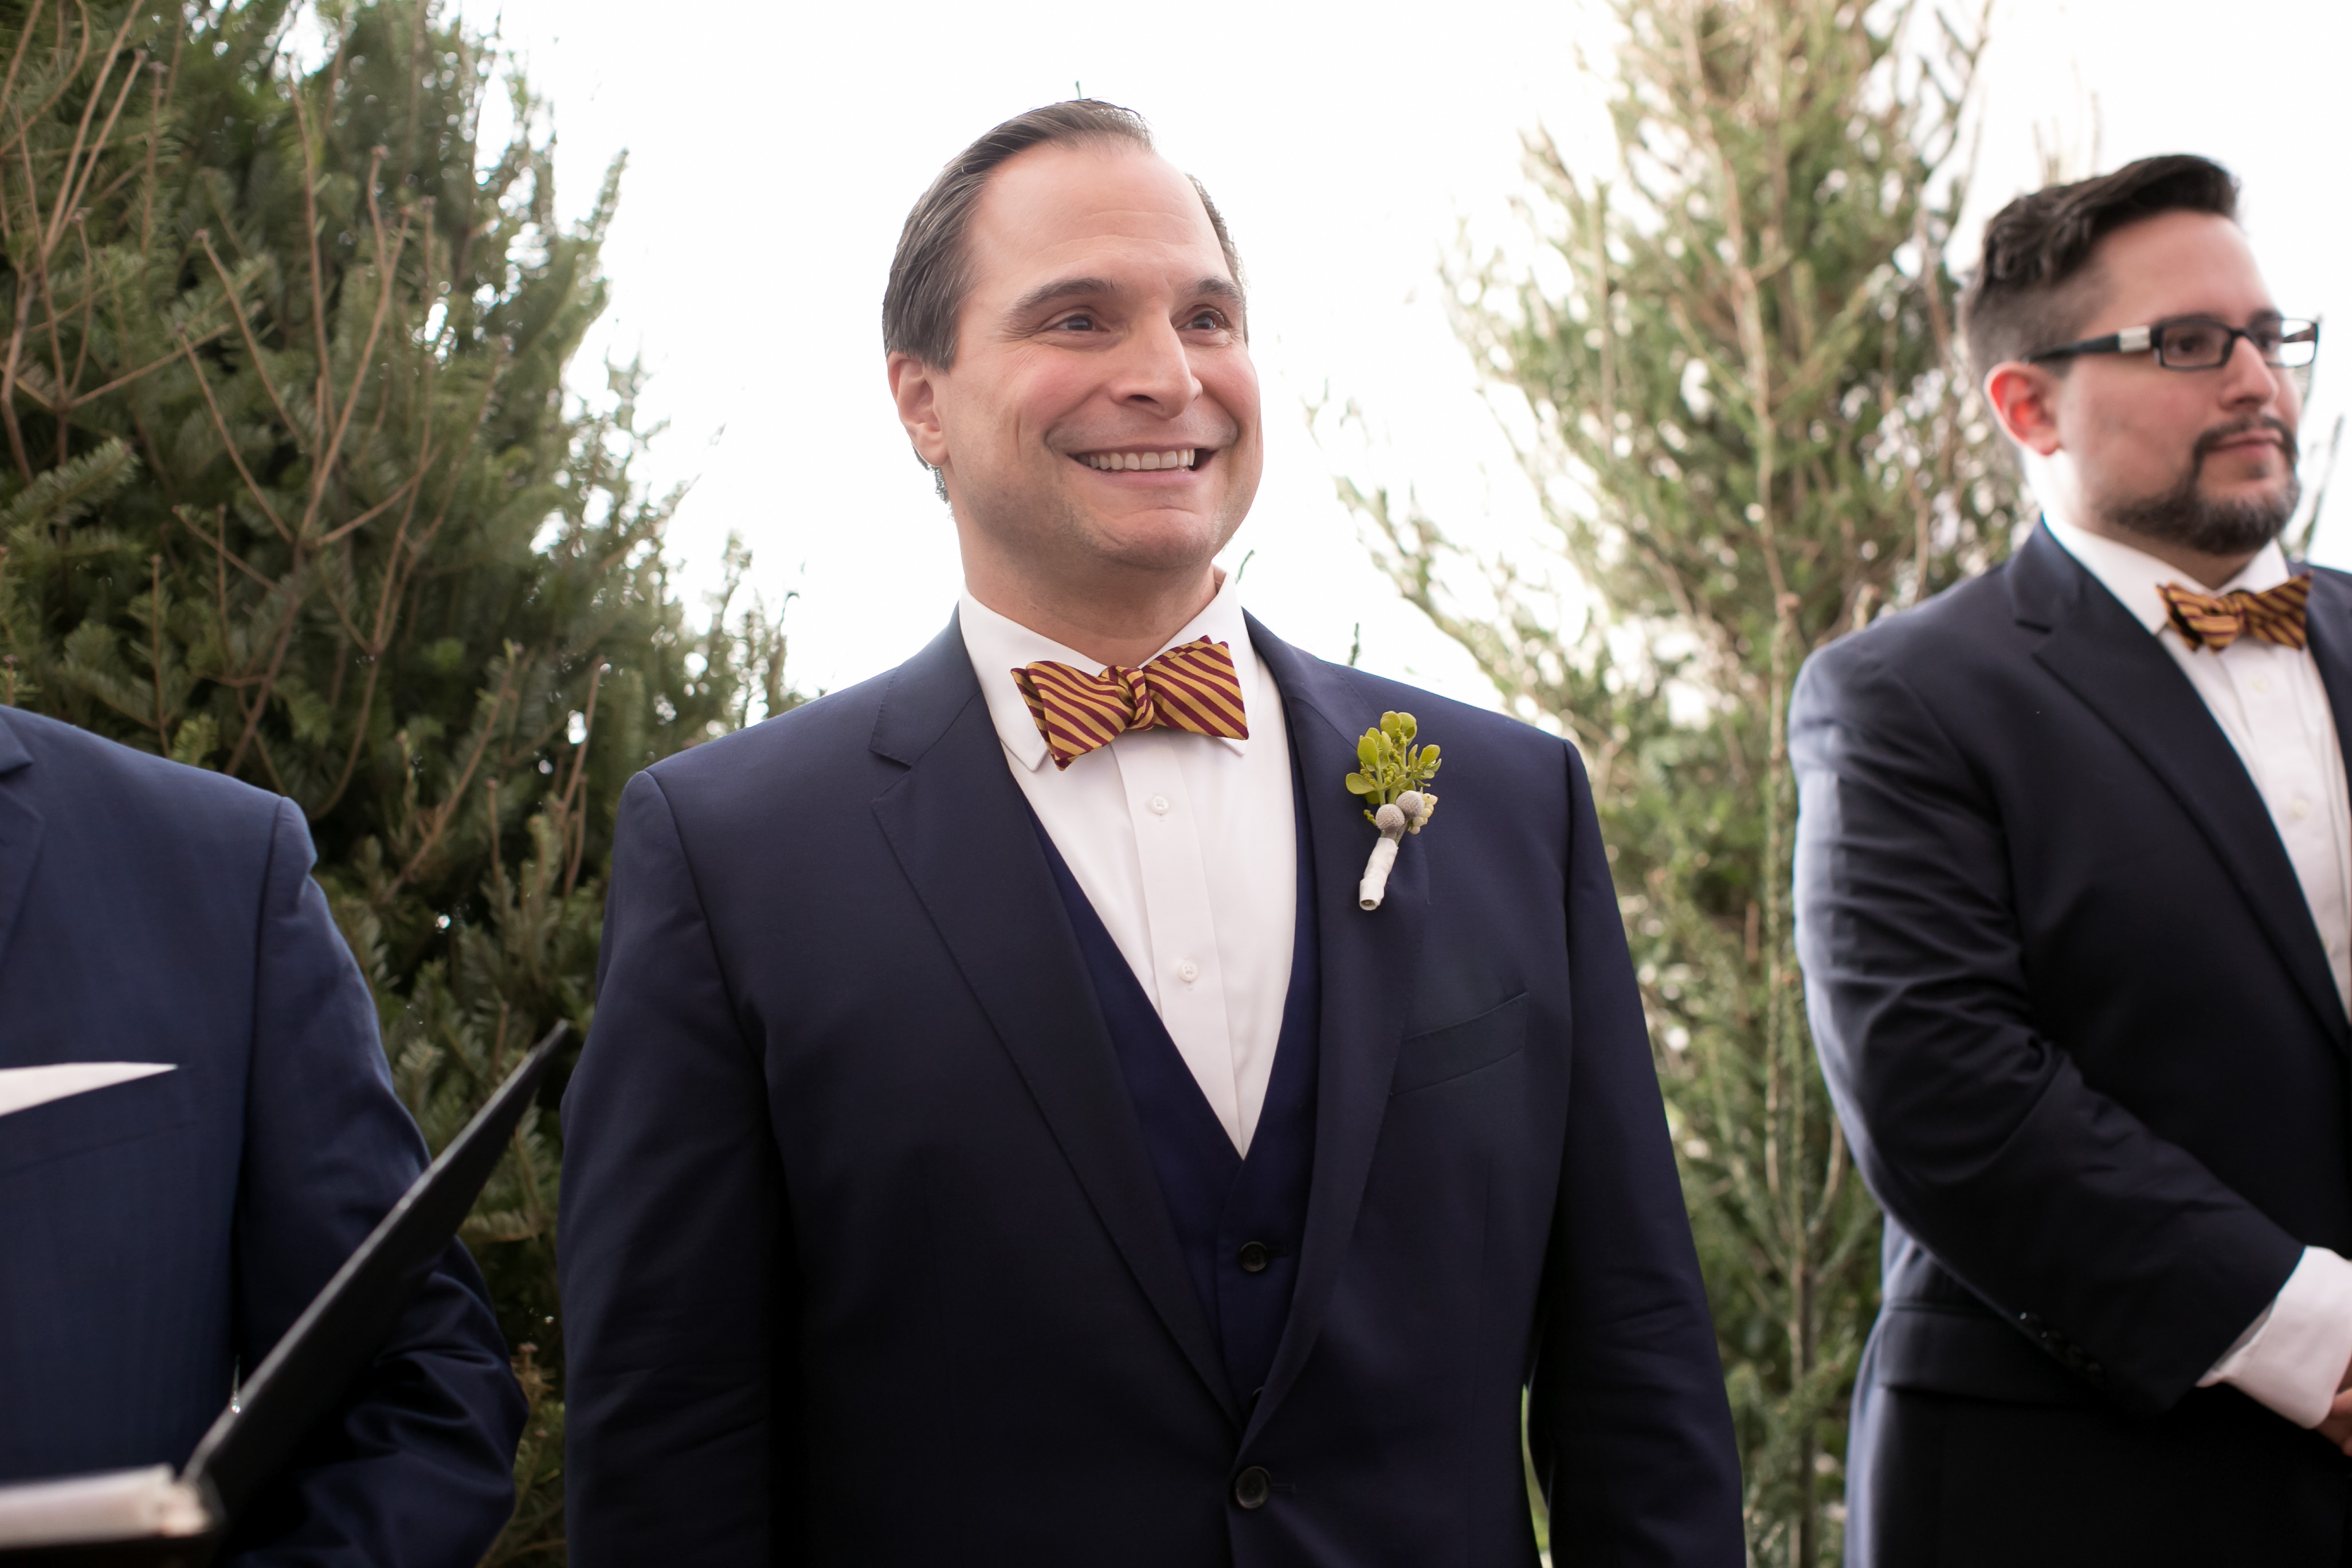 Florida Groom Excited Happy Reaction to Bride Walking Down the Aisle Wearing Navy Blue Suit with Striped Yellow and Burgundy Bowtie | Tampa Bay Wedding Photographer Carrie Wildes Photography